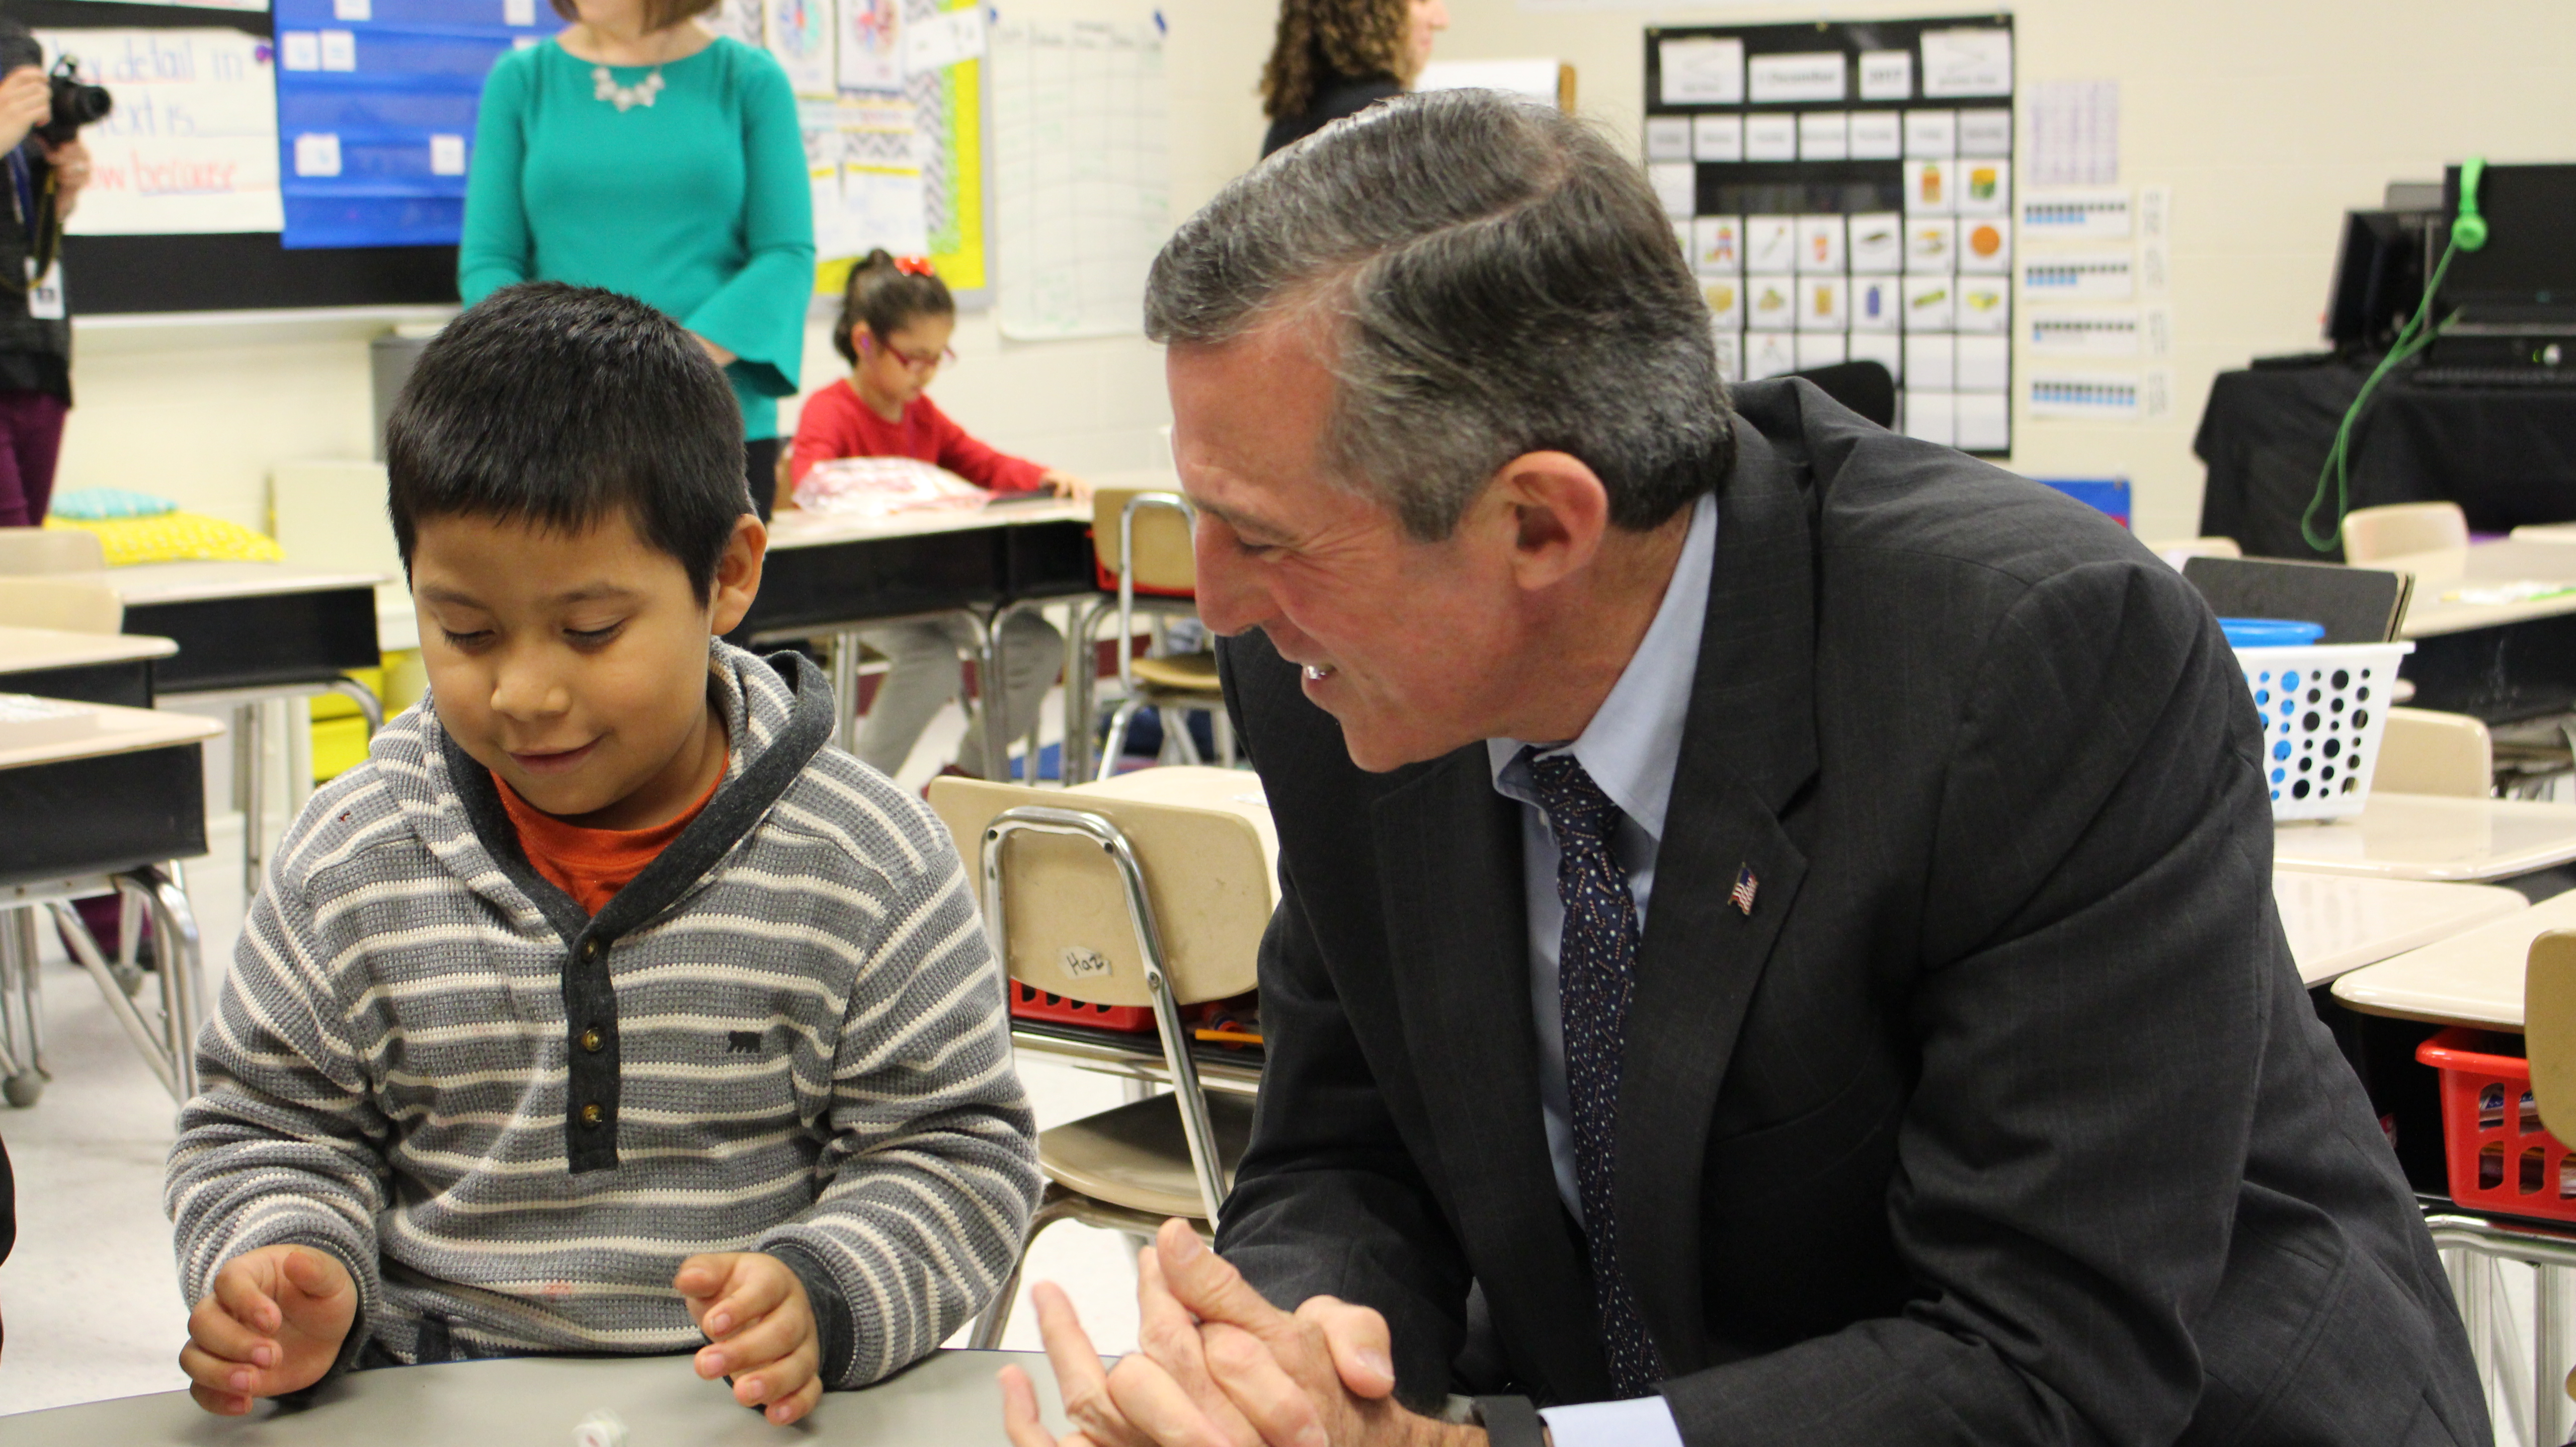 Governor Carney visits an English learner classroom at North Georgetown Elementary.